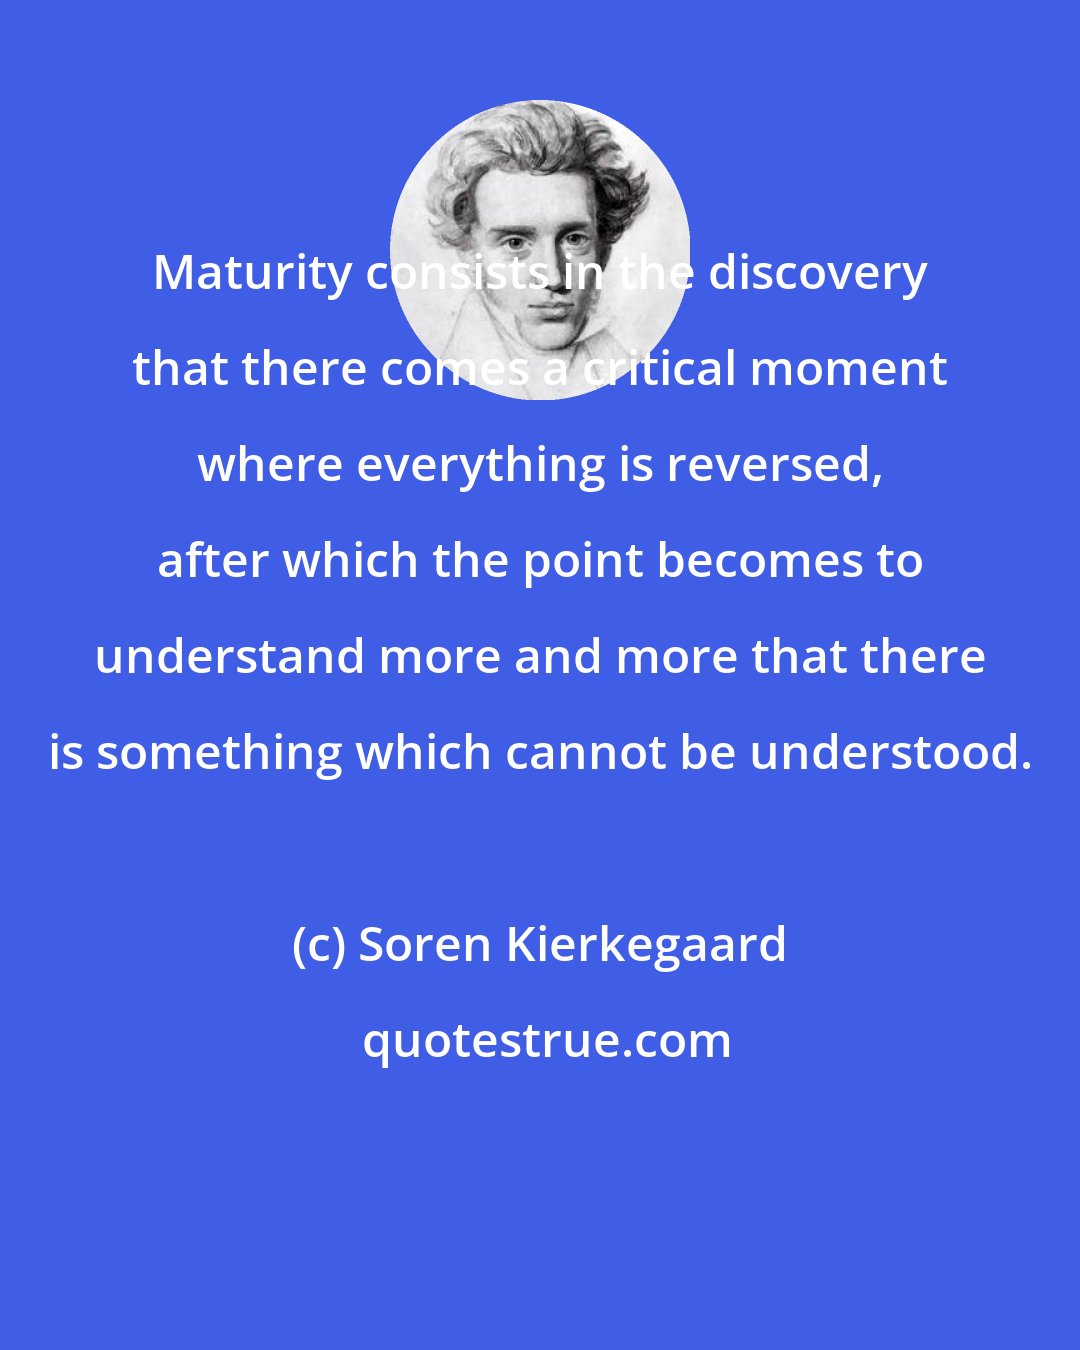 Soren Kierkegaard: Maturity consists in the discovery that there comes a critical moment where everything is reversed, after which the point becomes to understand more and more that there is something which cannot be understood.